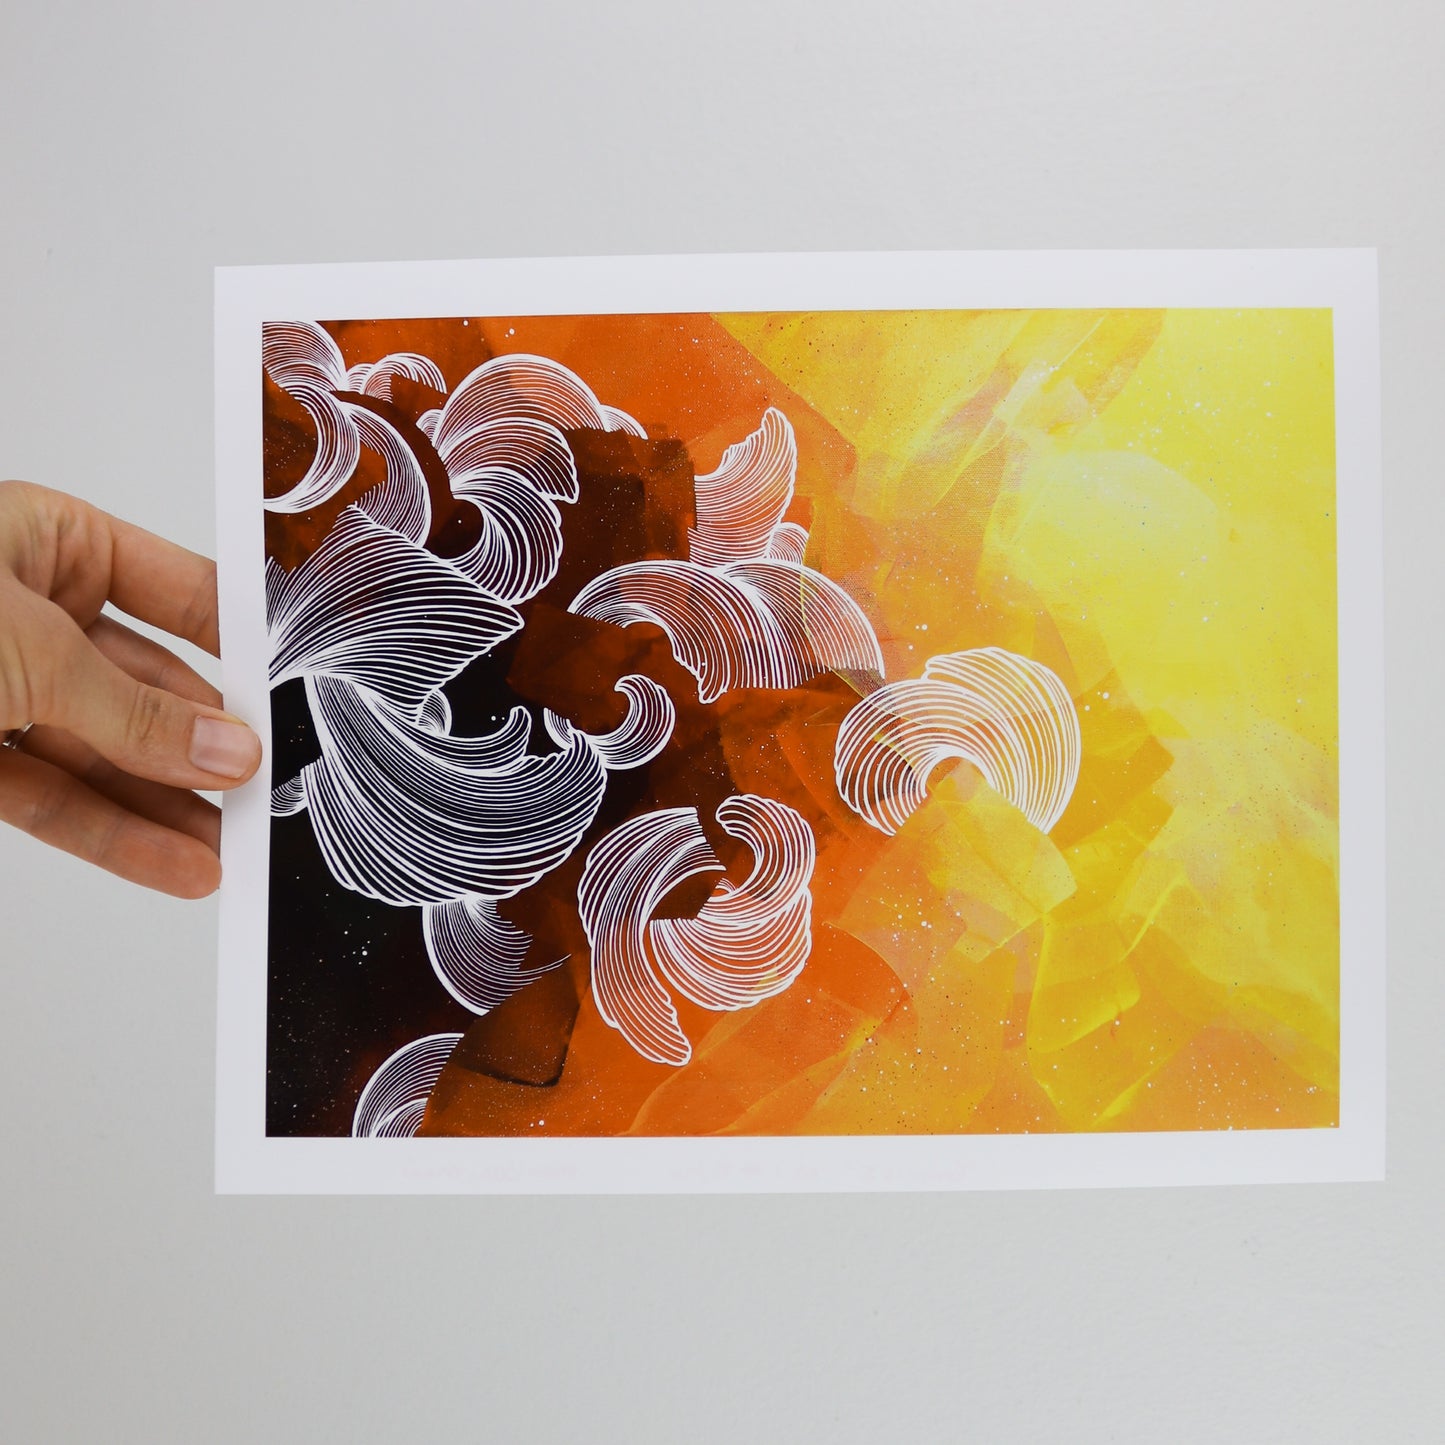 First Edition Print: "Embers I"